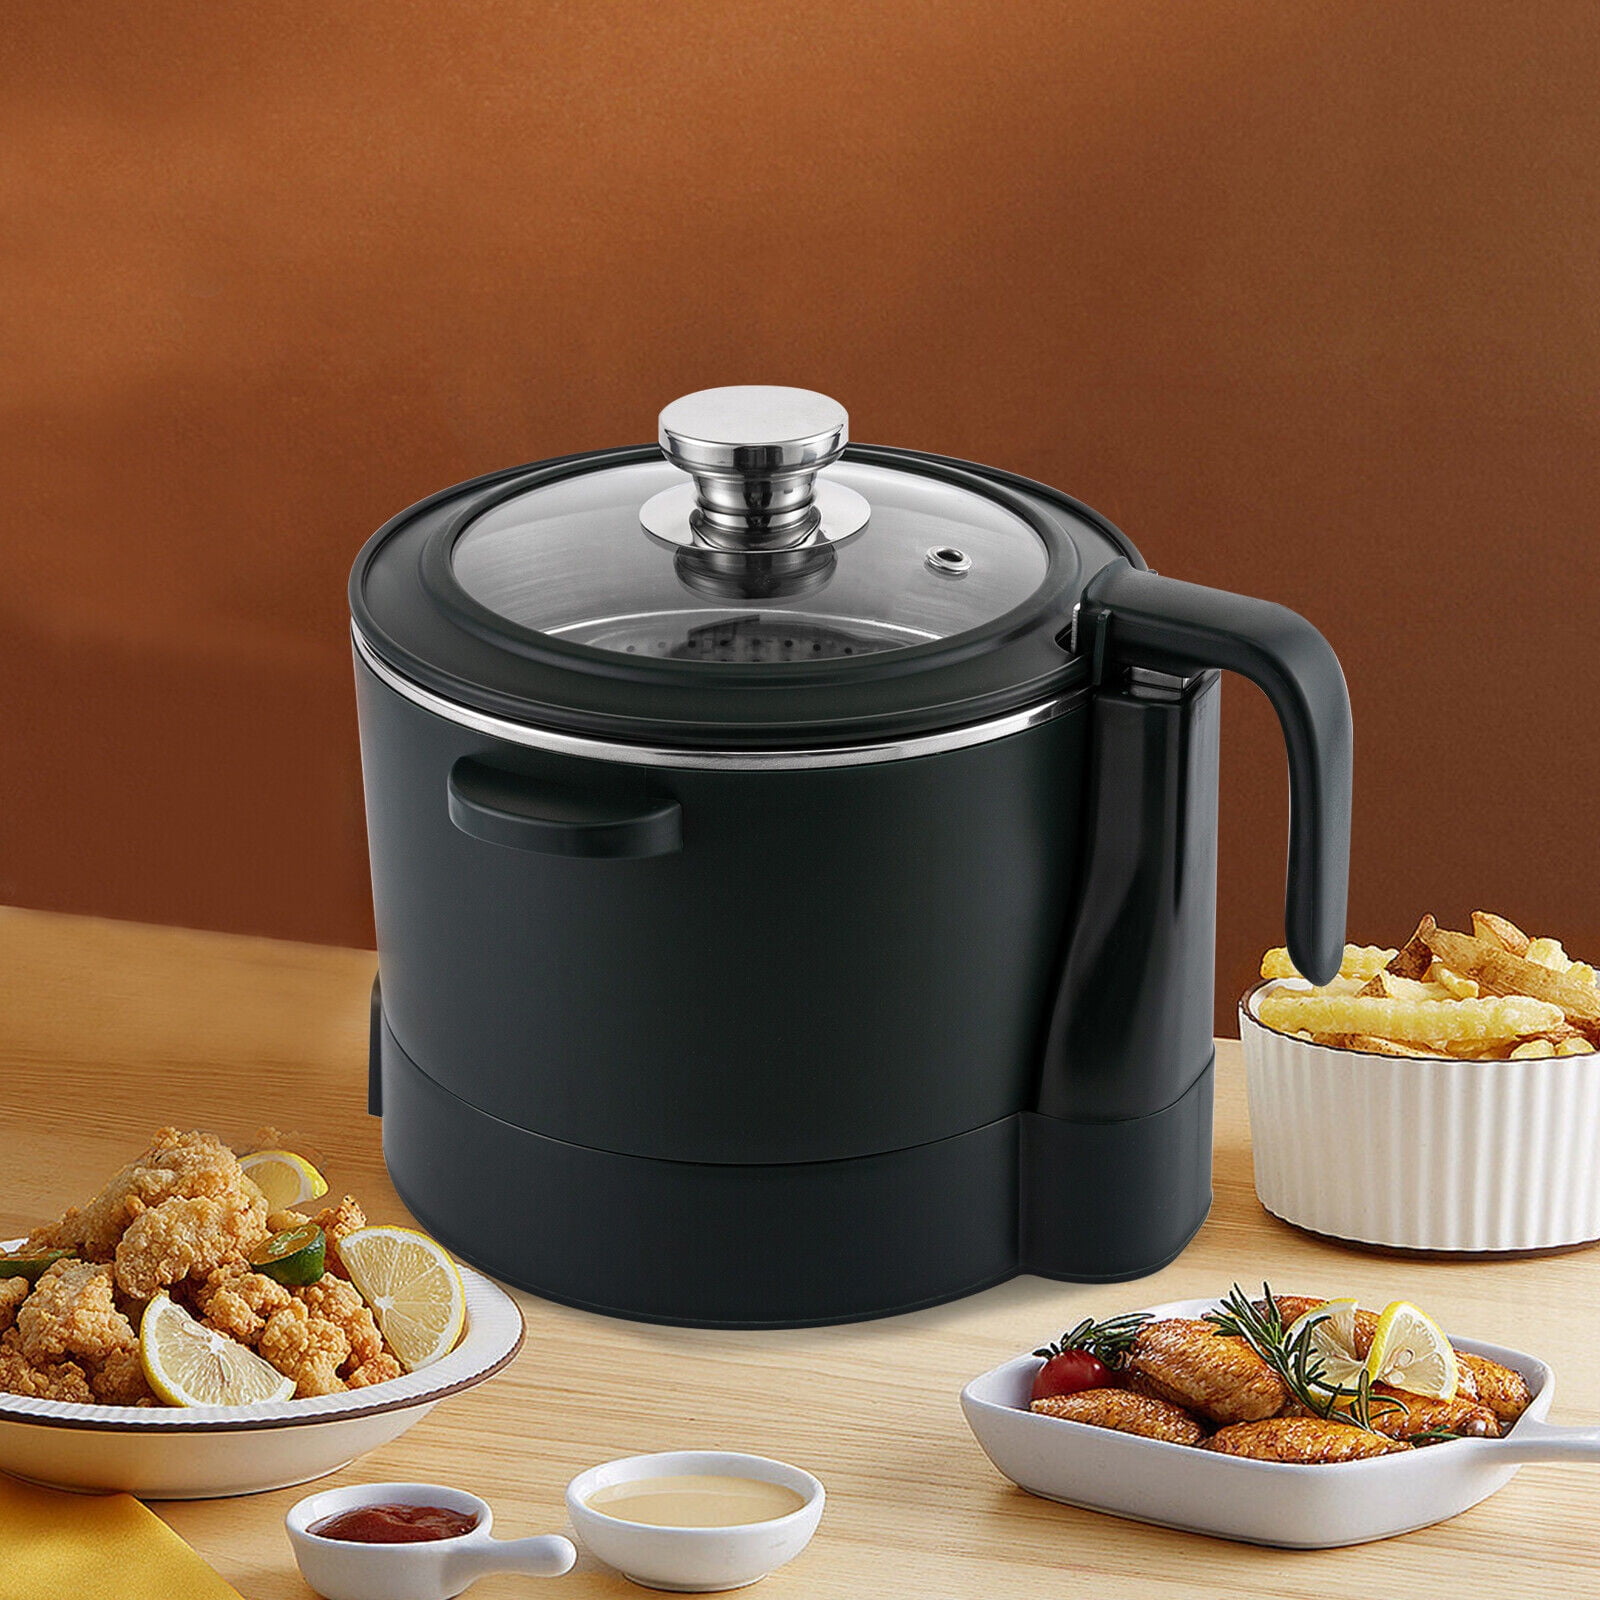 MIDUO 3-in-1 Smart Lifting Electric Hot Pot with Steaming Basket